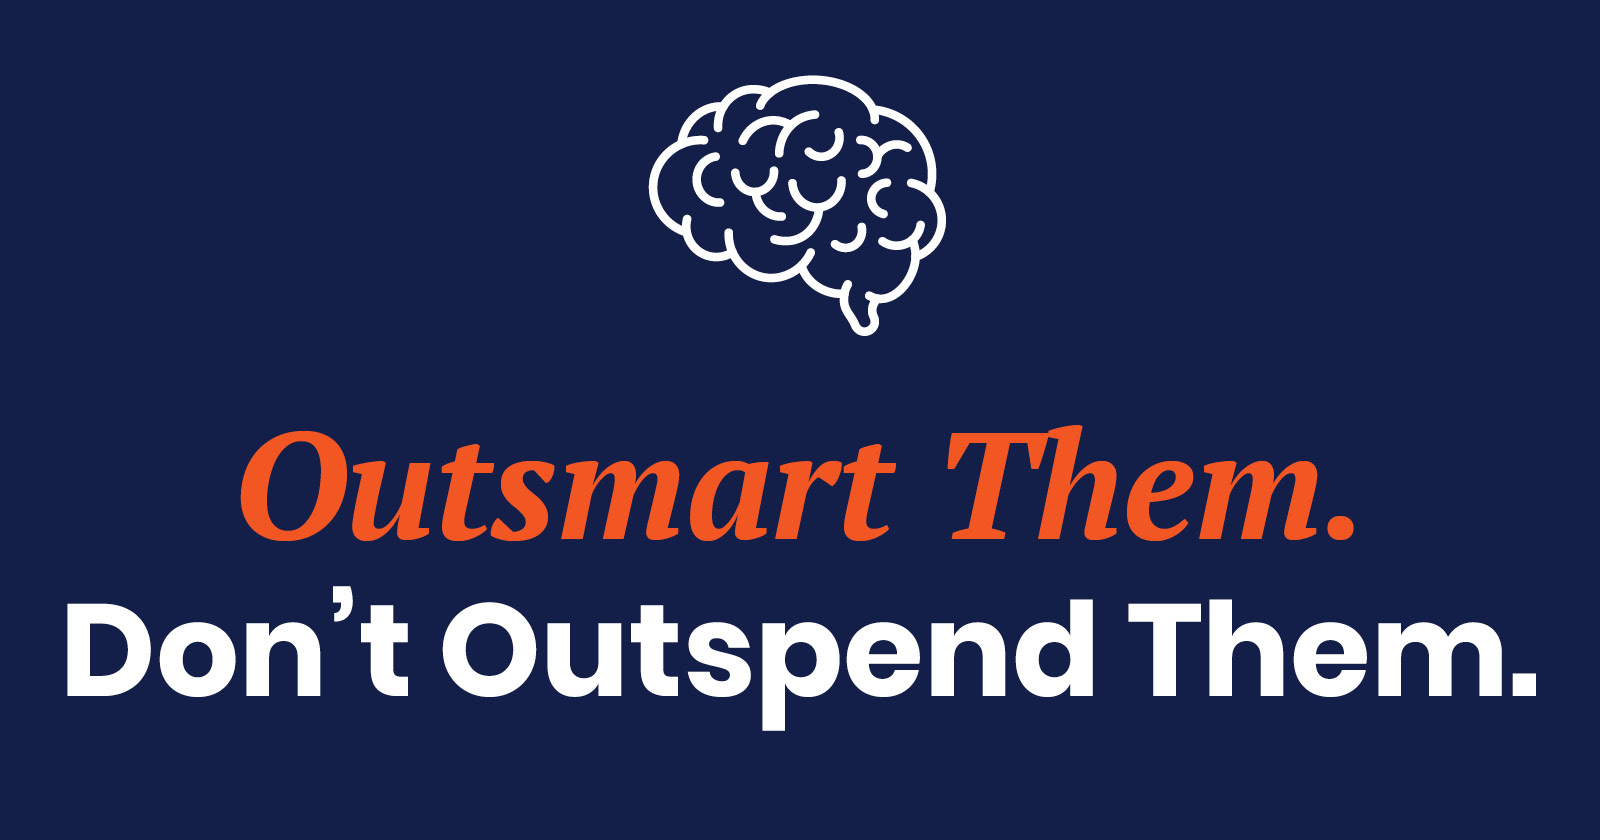 Outsmart Them. Don’t Outspend Them.